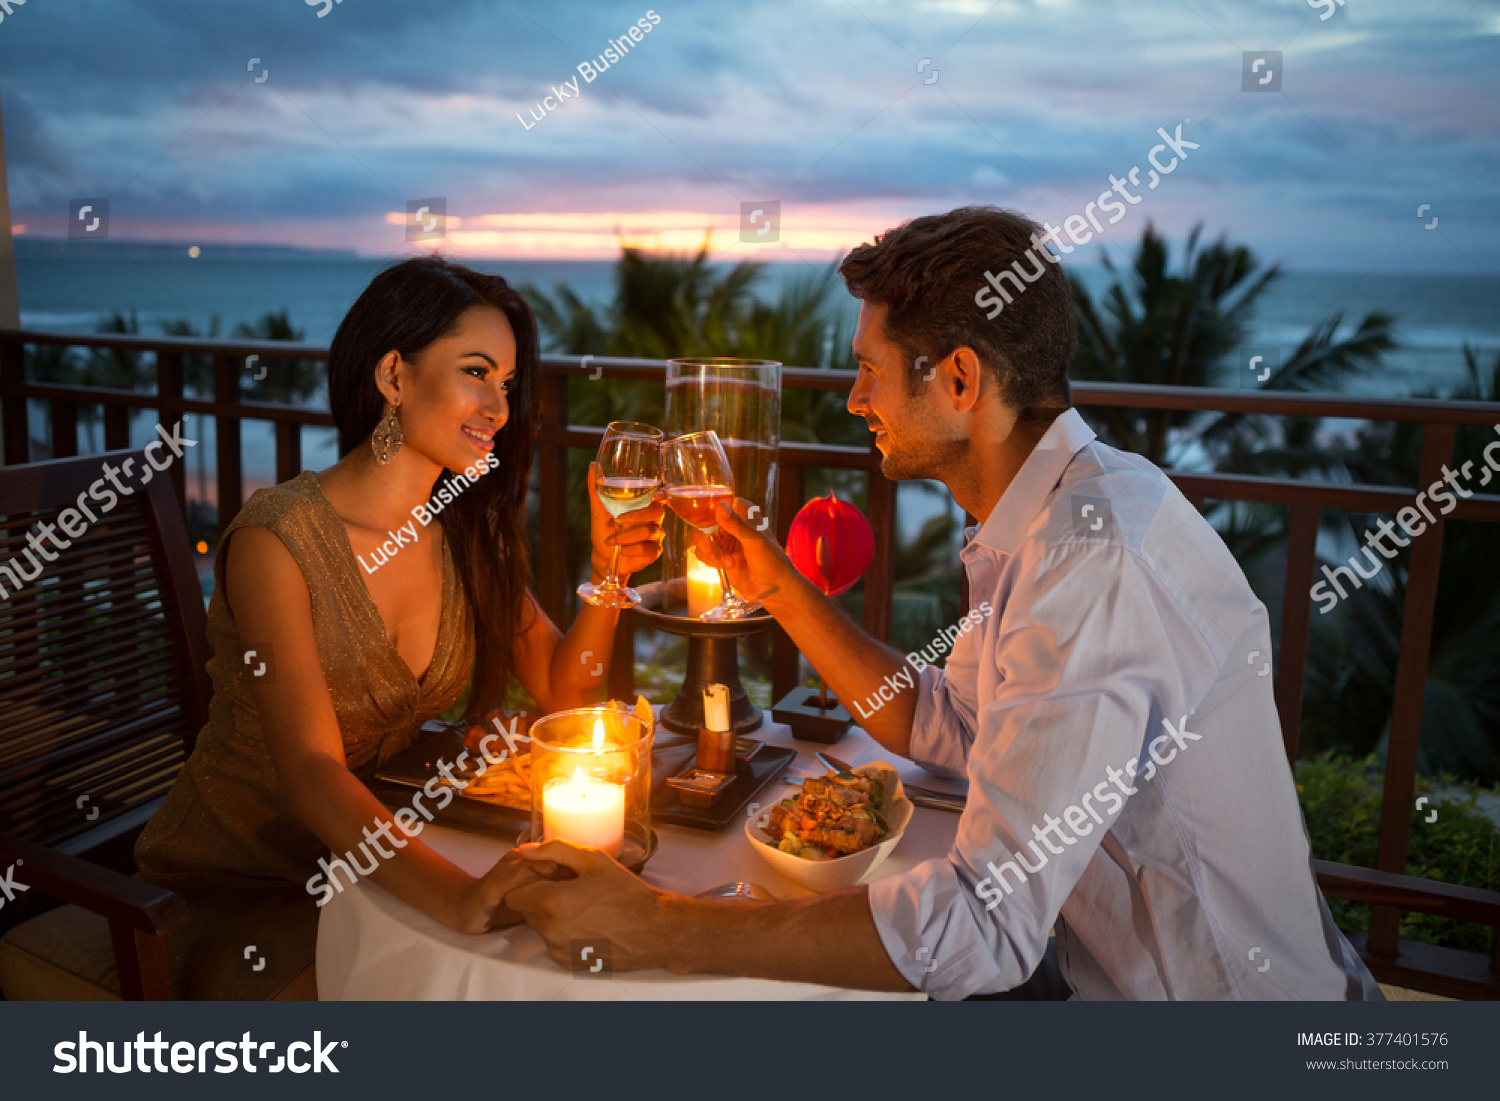 young couple enjoying a romantic dinner by candlelight, outdoor #377401576